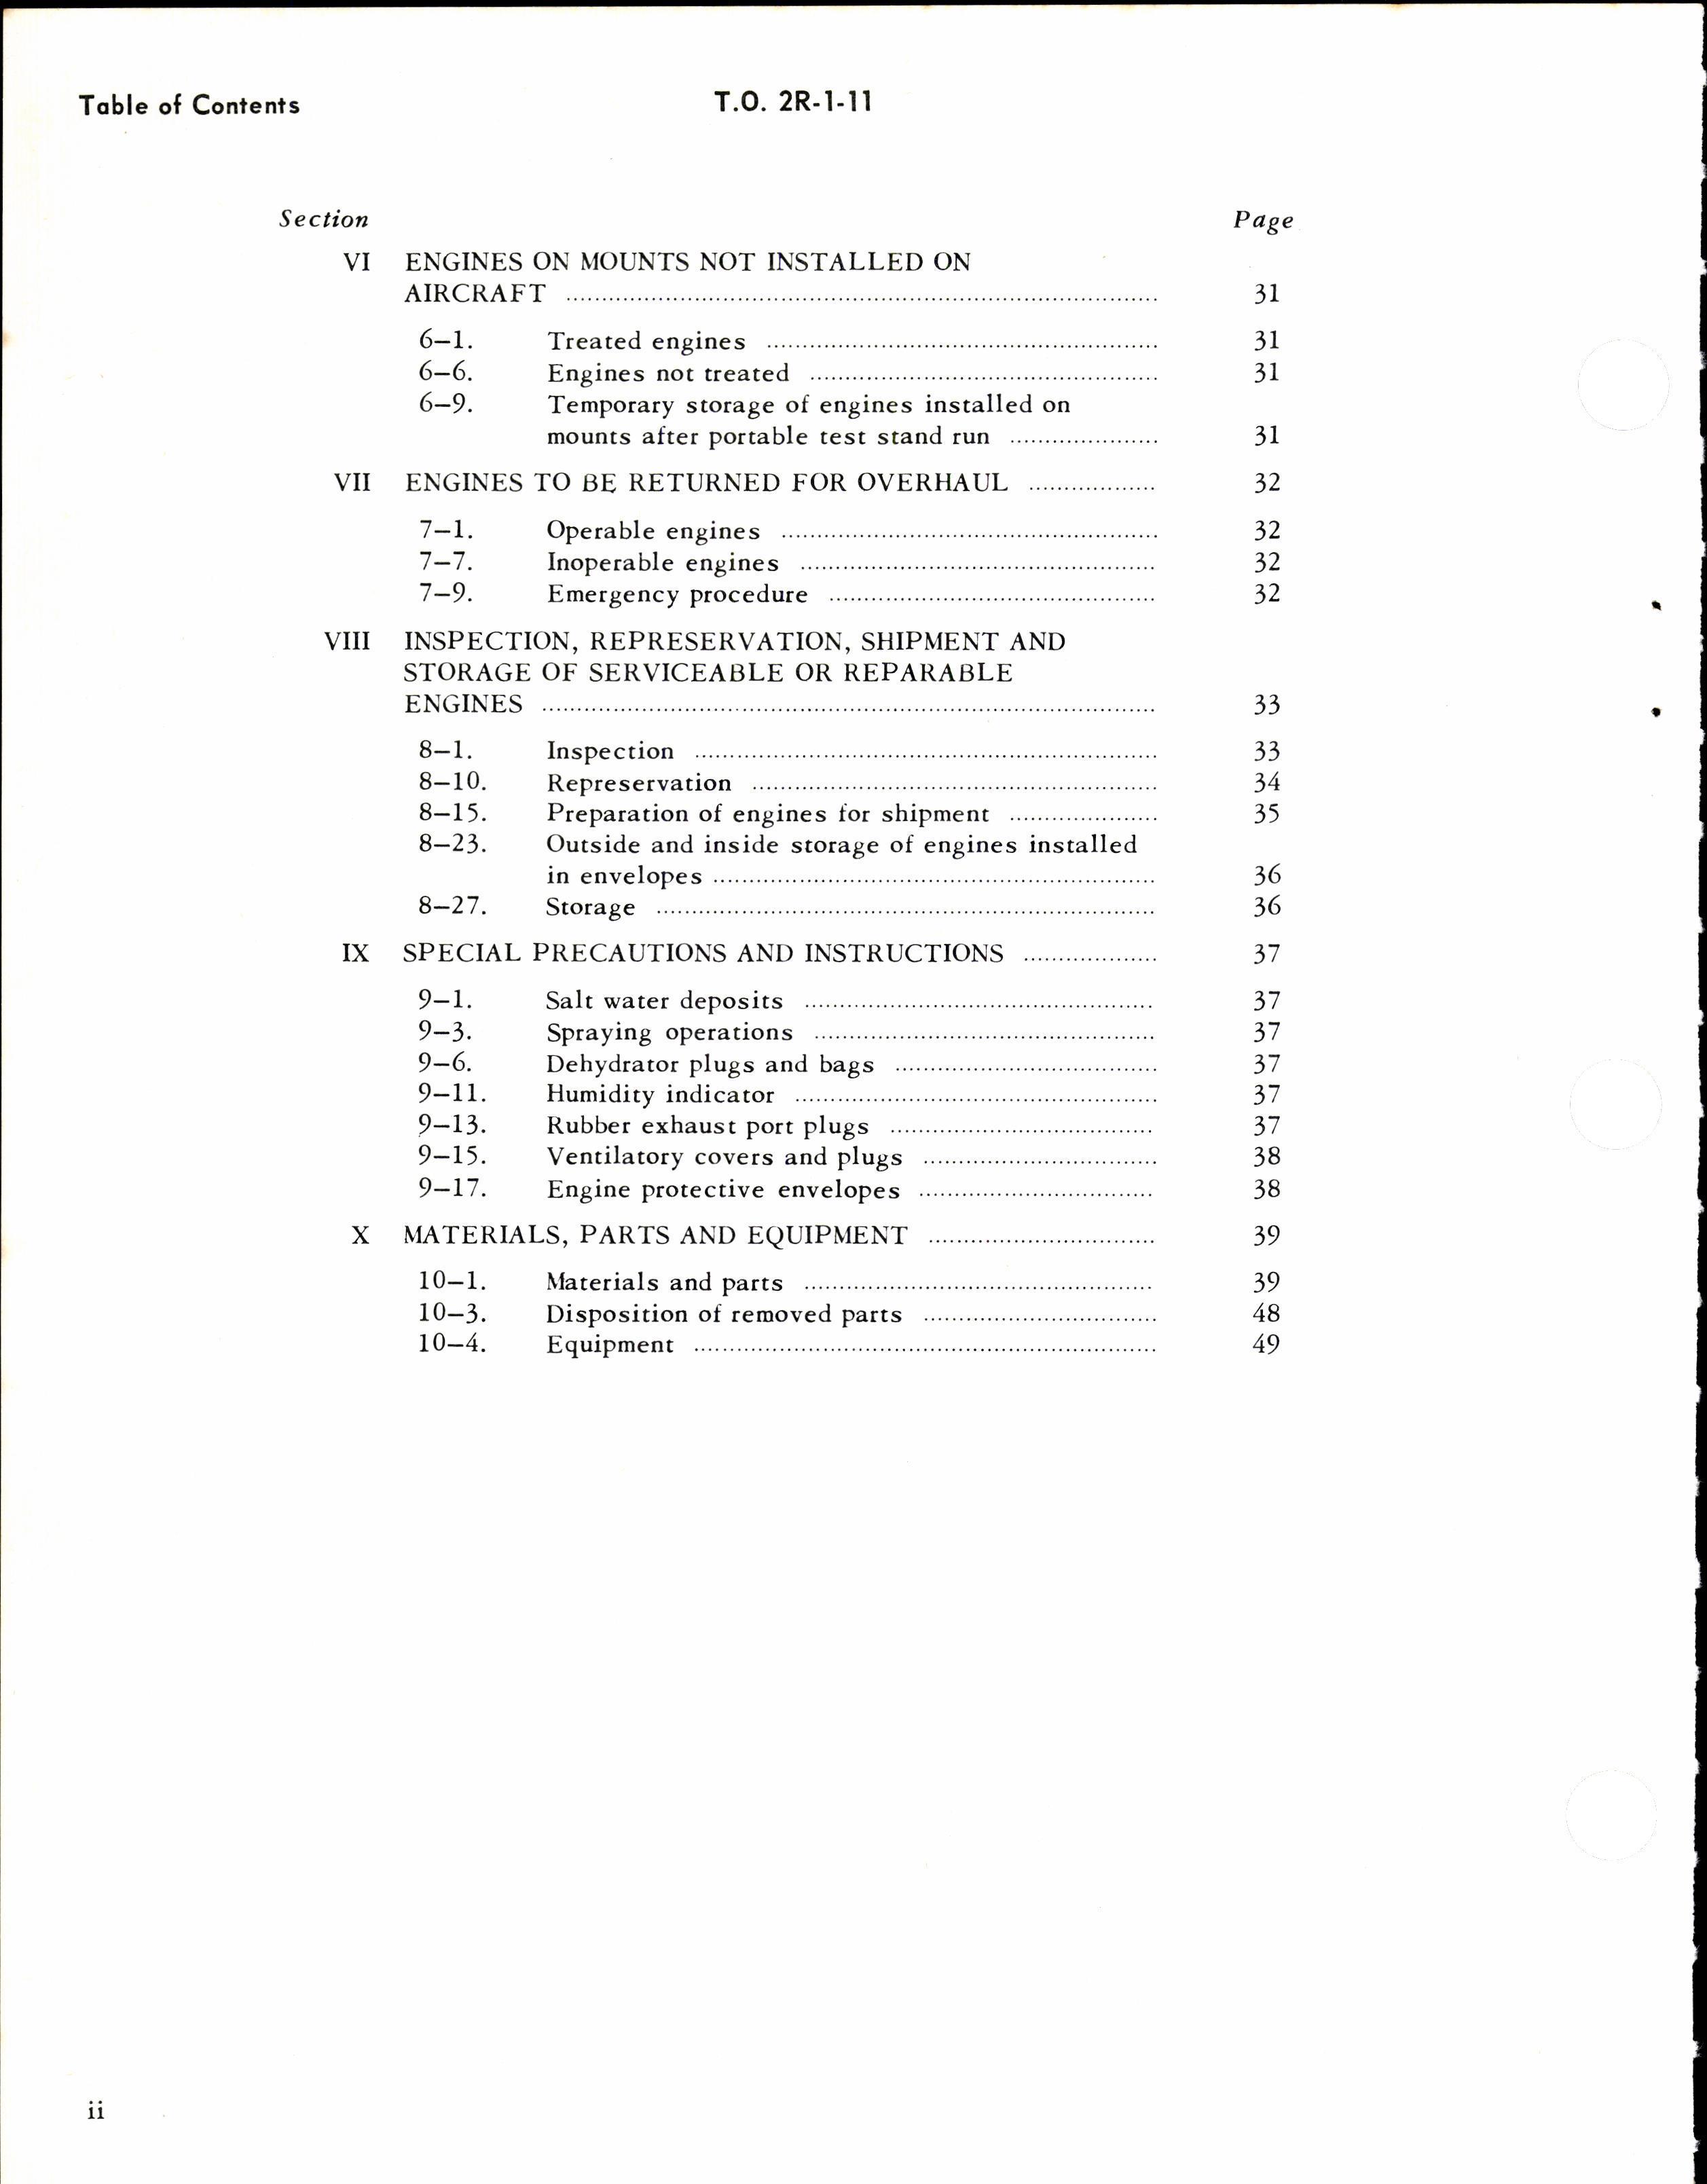 Sample page 4 from AirCorps Library document: Corrosion Control of Reciprocating Aircraft Engines